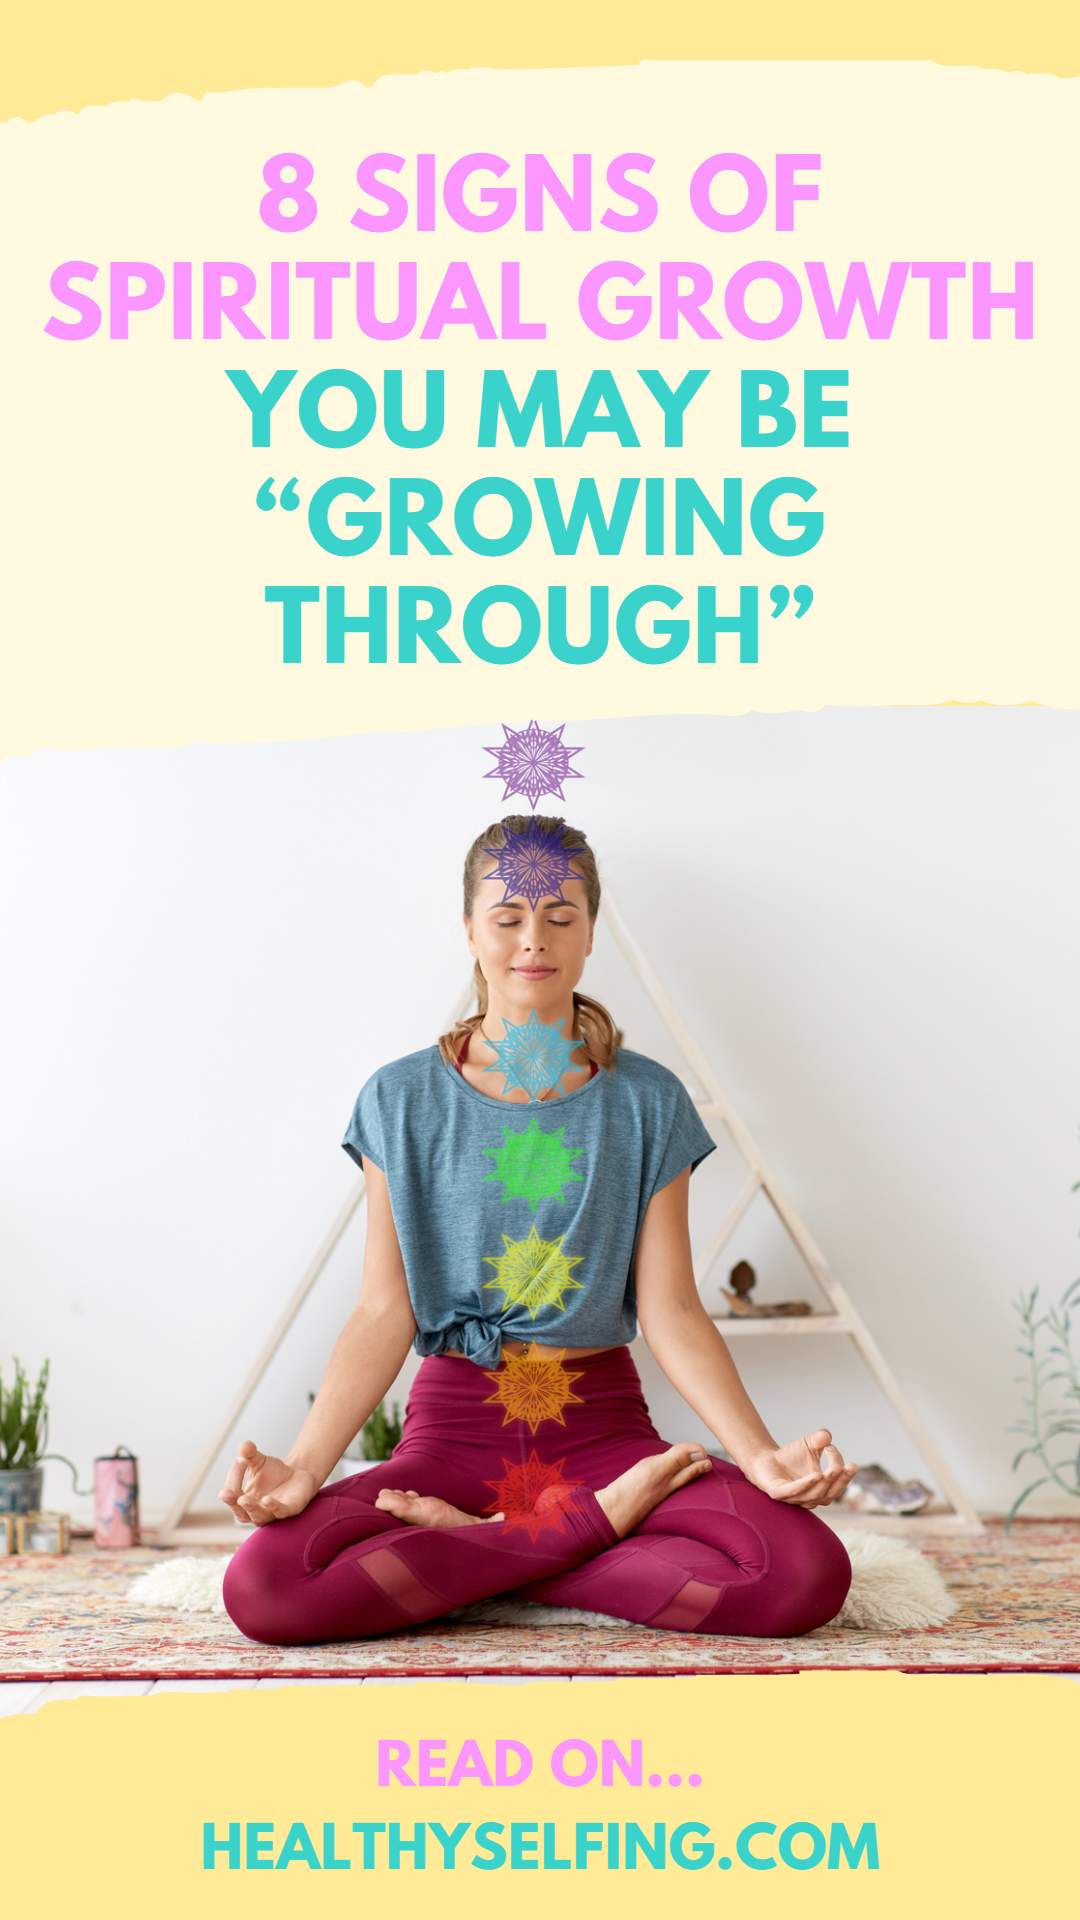 8 Signs of Spiritual Growth You May Be “Growing Through”